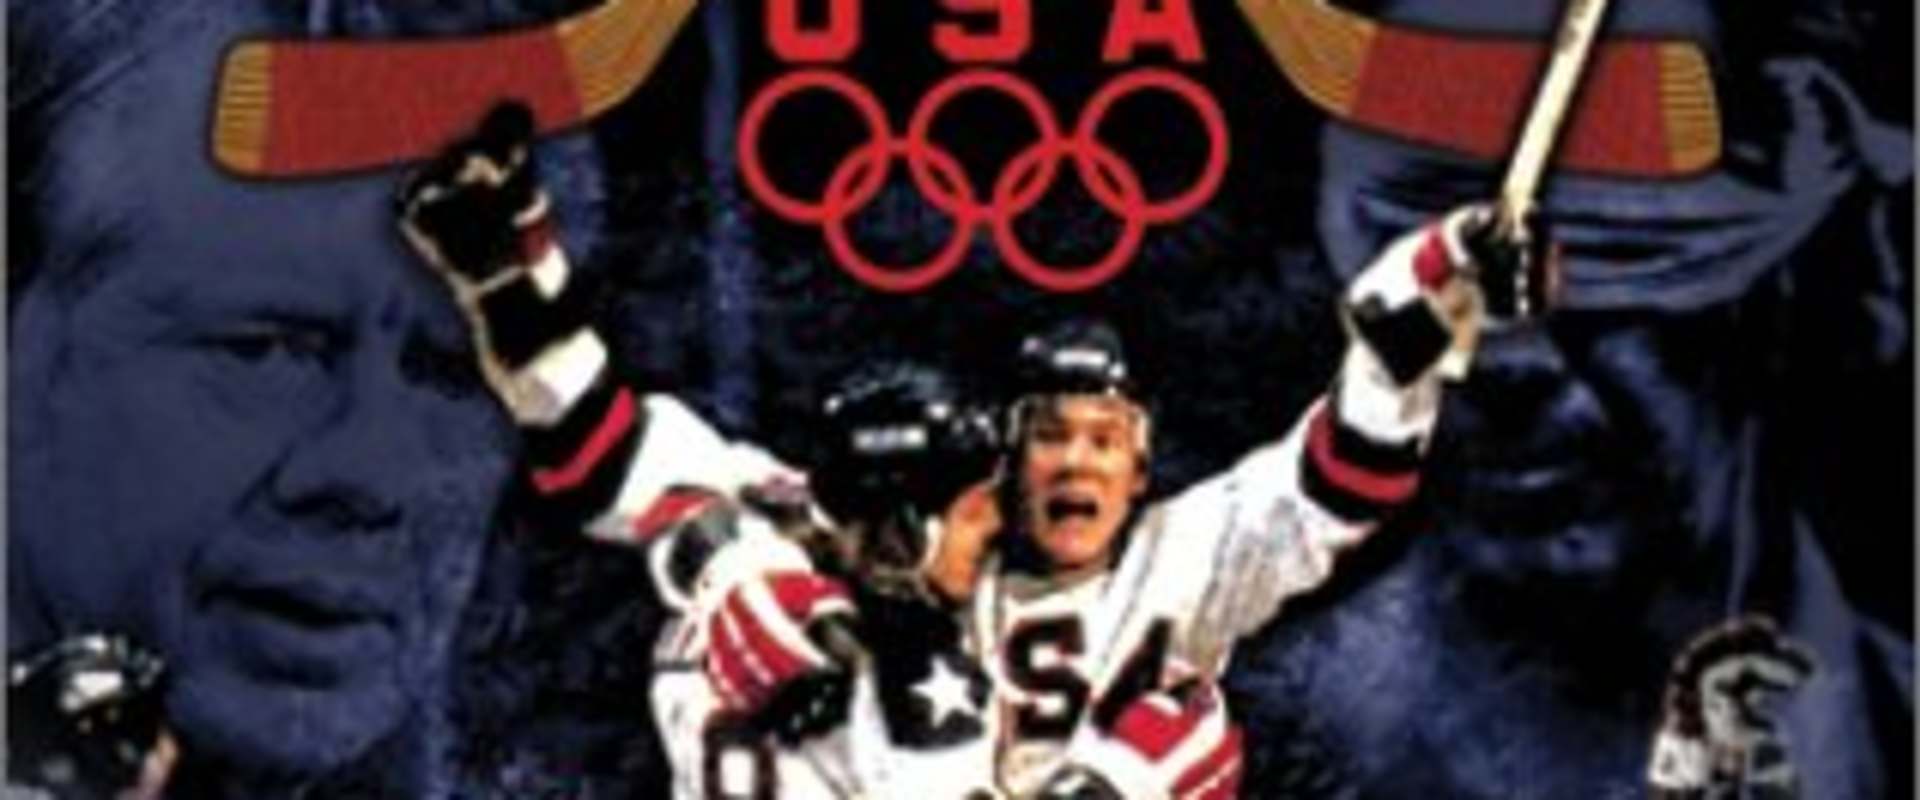 Do You Believe in Miracles? The Story of the 1980 U.S. Hockey Team background 1